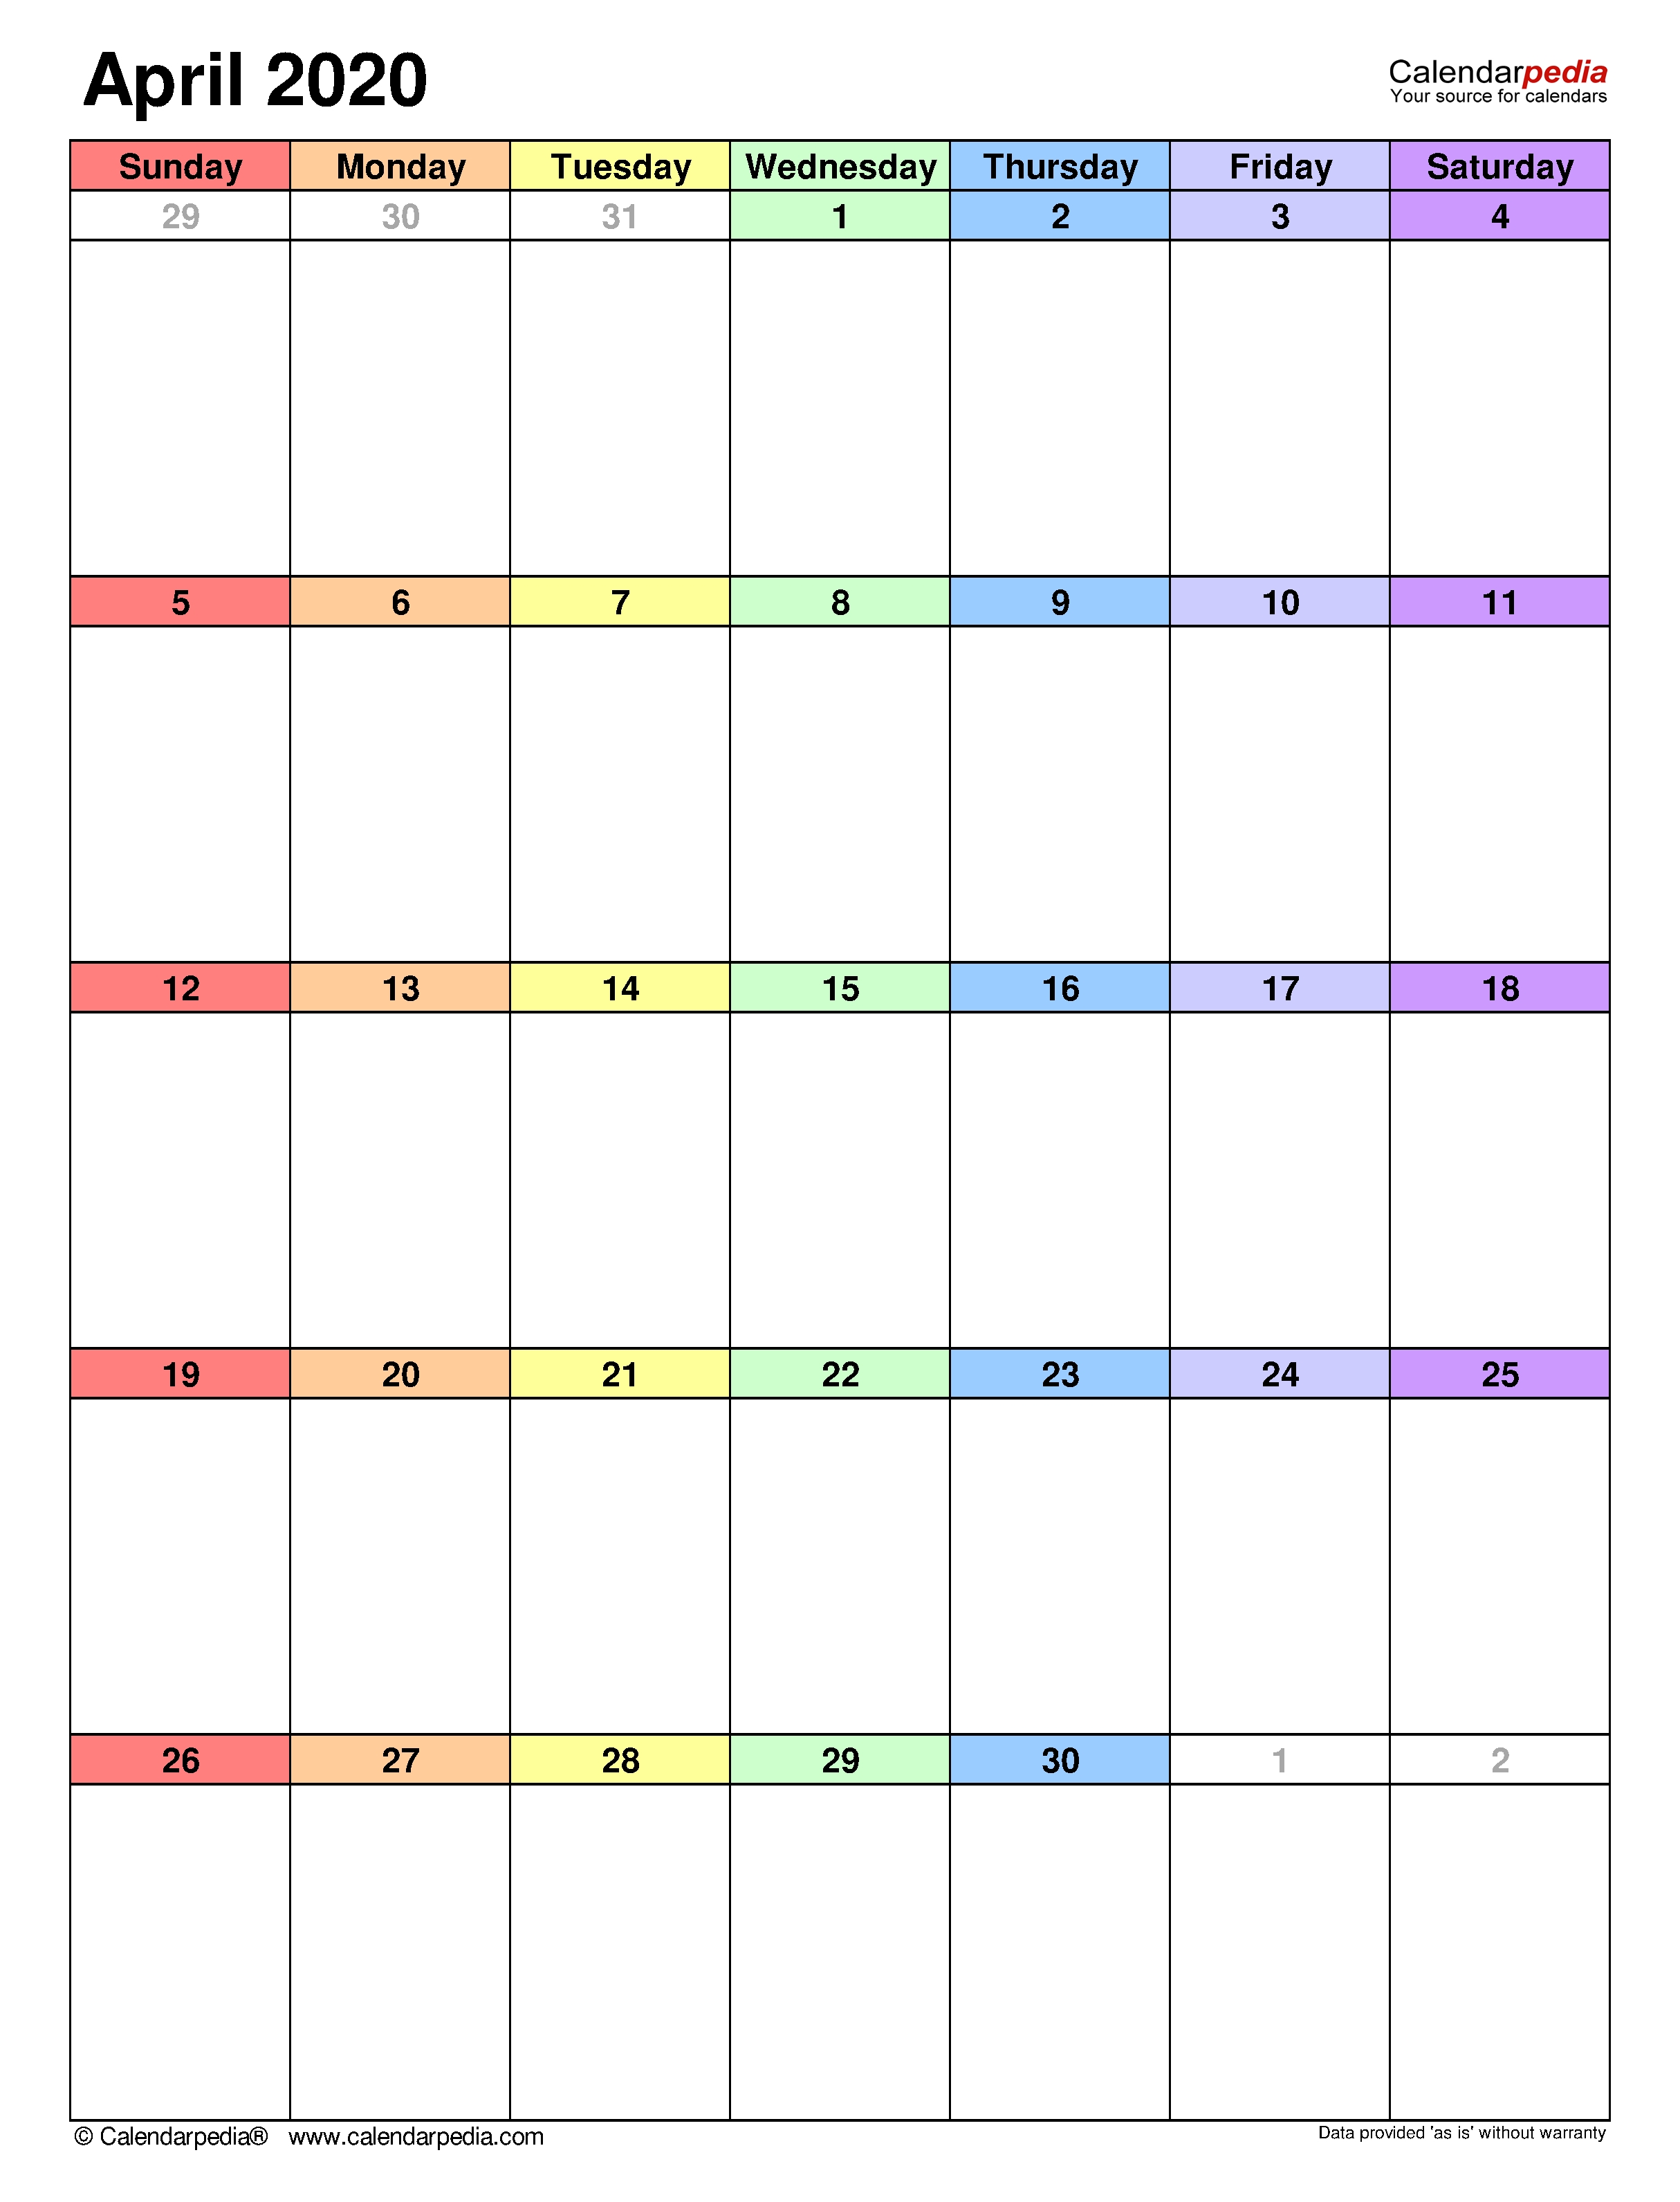 April 2020 - Calendar Templates For Word, Excel And Pdf